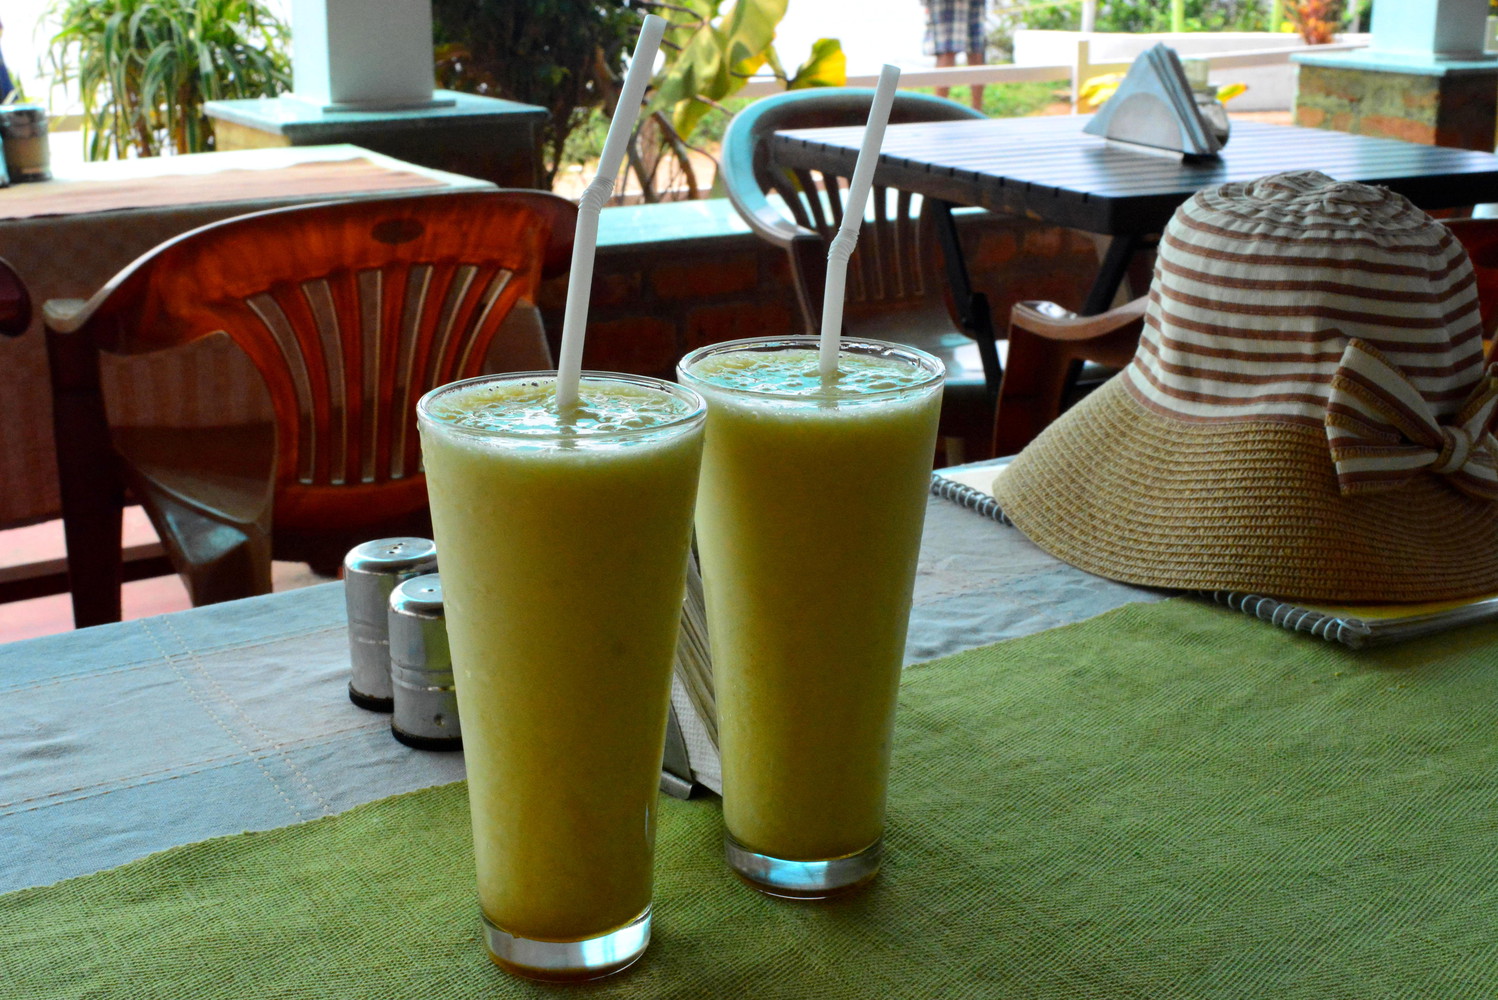 Two glasses of mixed fruit juice known as Banana Boat which is made of banana, pineapple, and honey